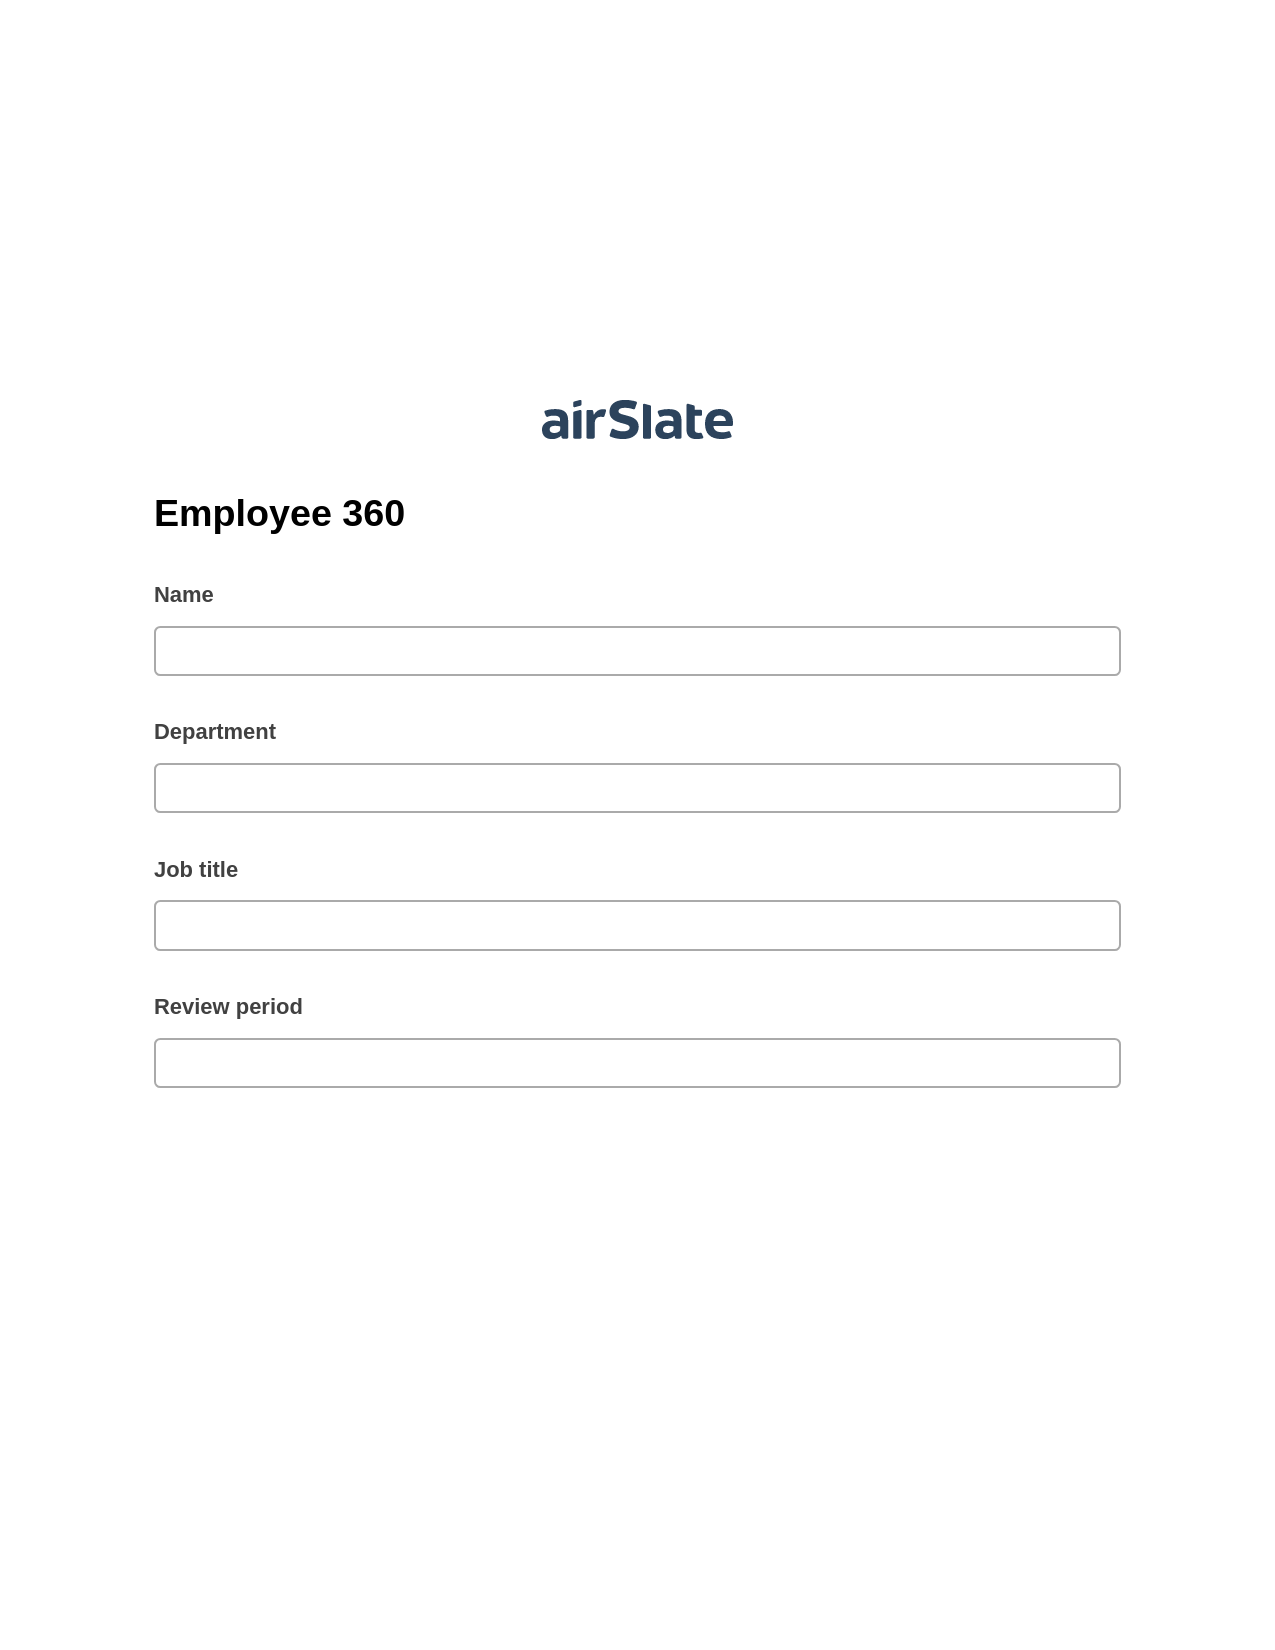 Multirole Employee 360 Pre-fill from Salesforce Records with SOQL Bot, Slack Notification Bot, Export to Smartsheet